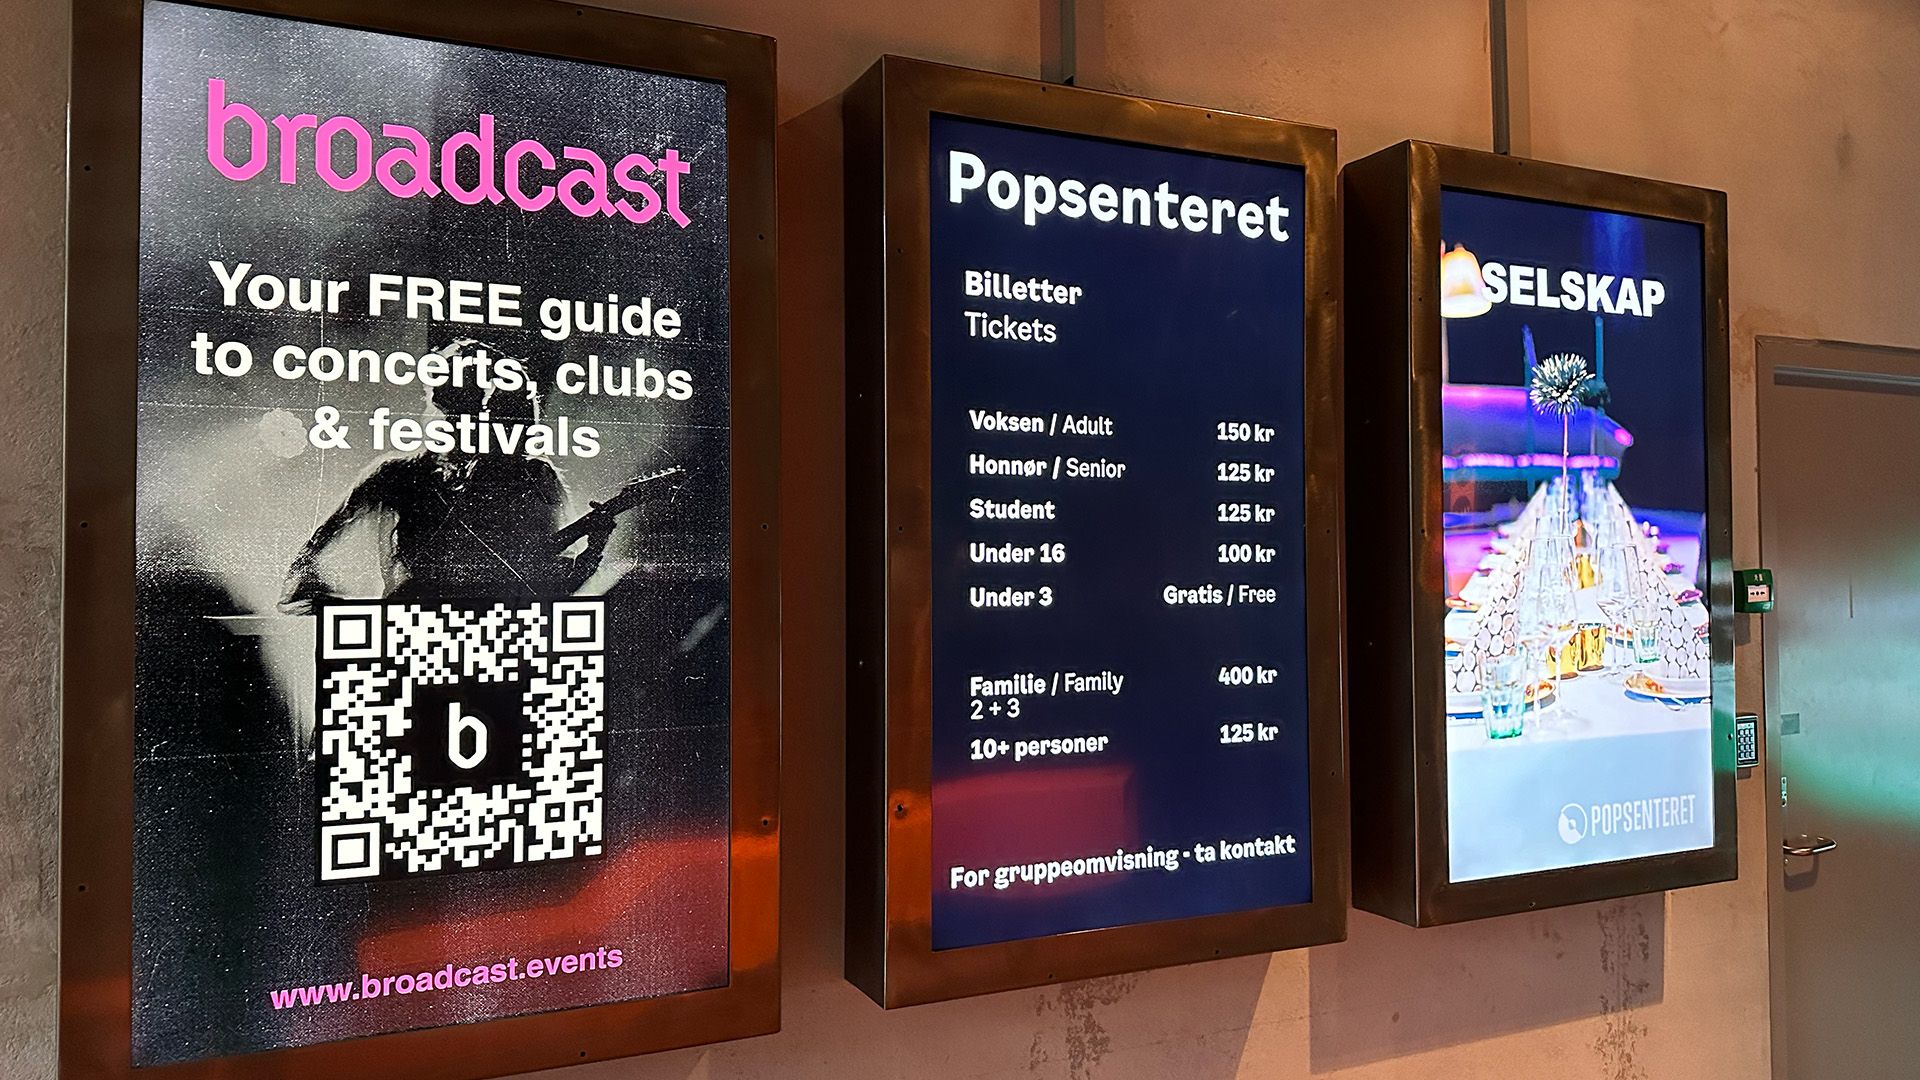 Cover Image for We are on the screens at Riksscenen and Popsenteret!